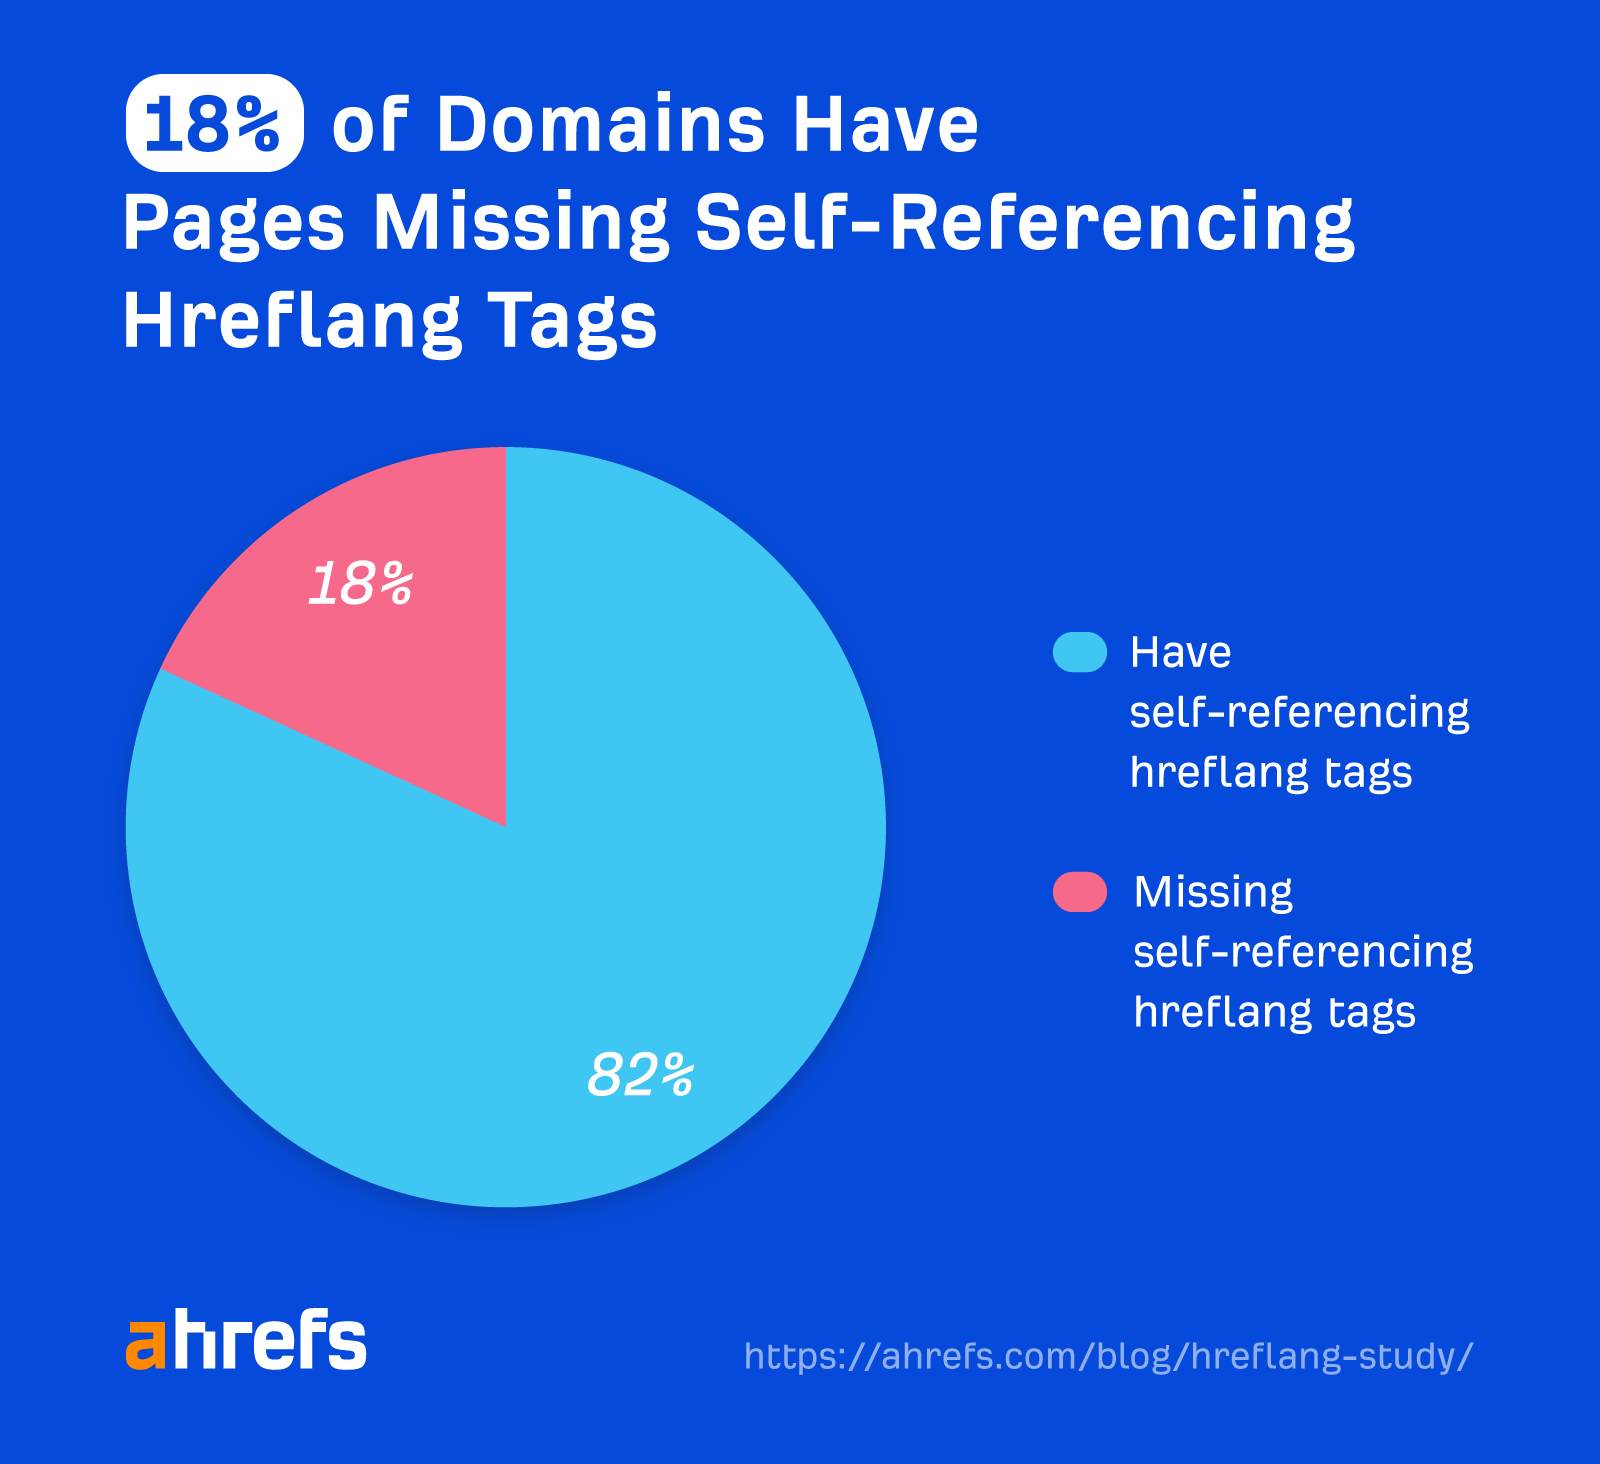 18% of domains have pages missing self-referencing hreflang tags